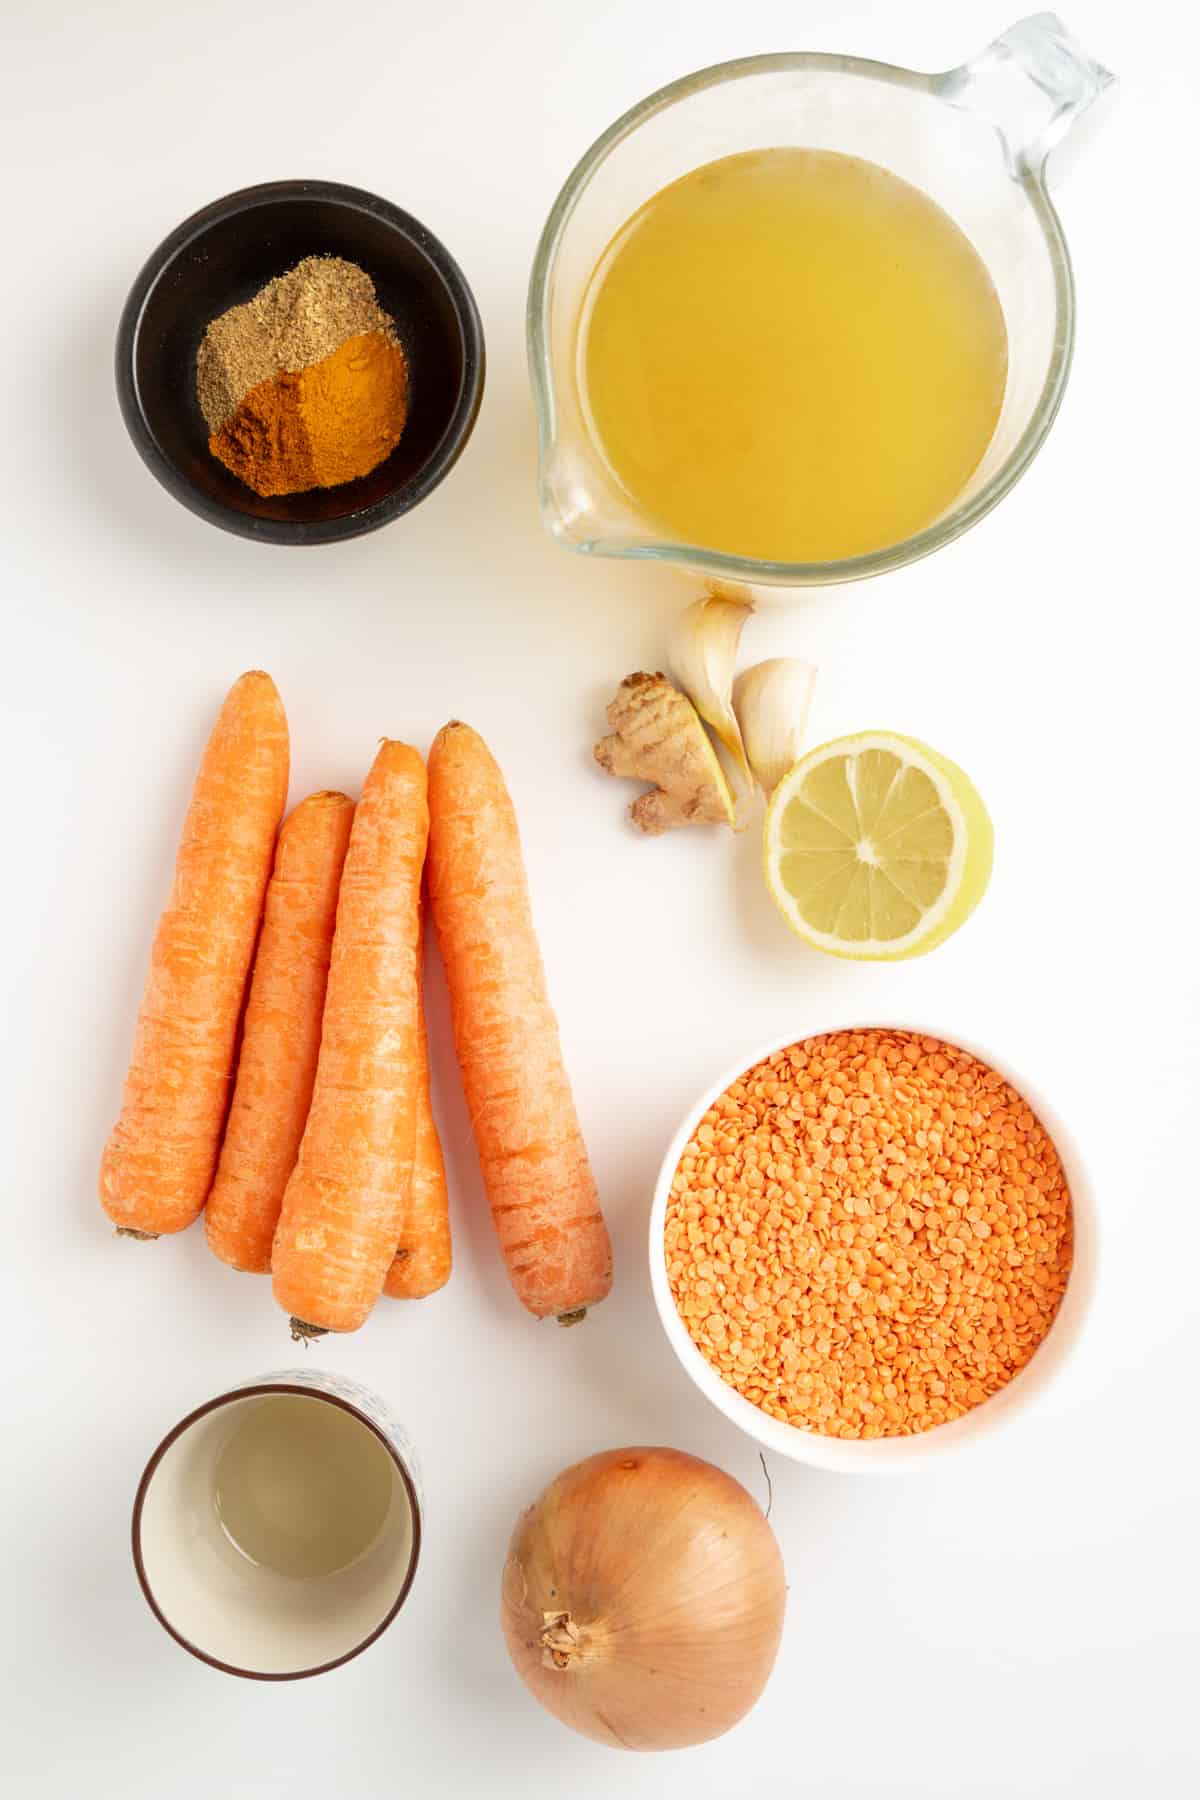 Ingredients for carrot and lentil soup laid out on a white surface.